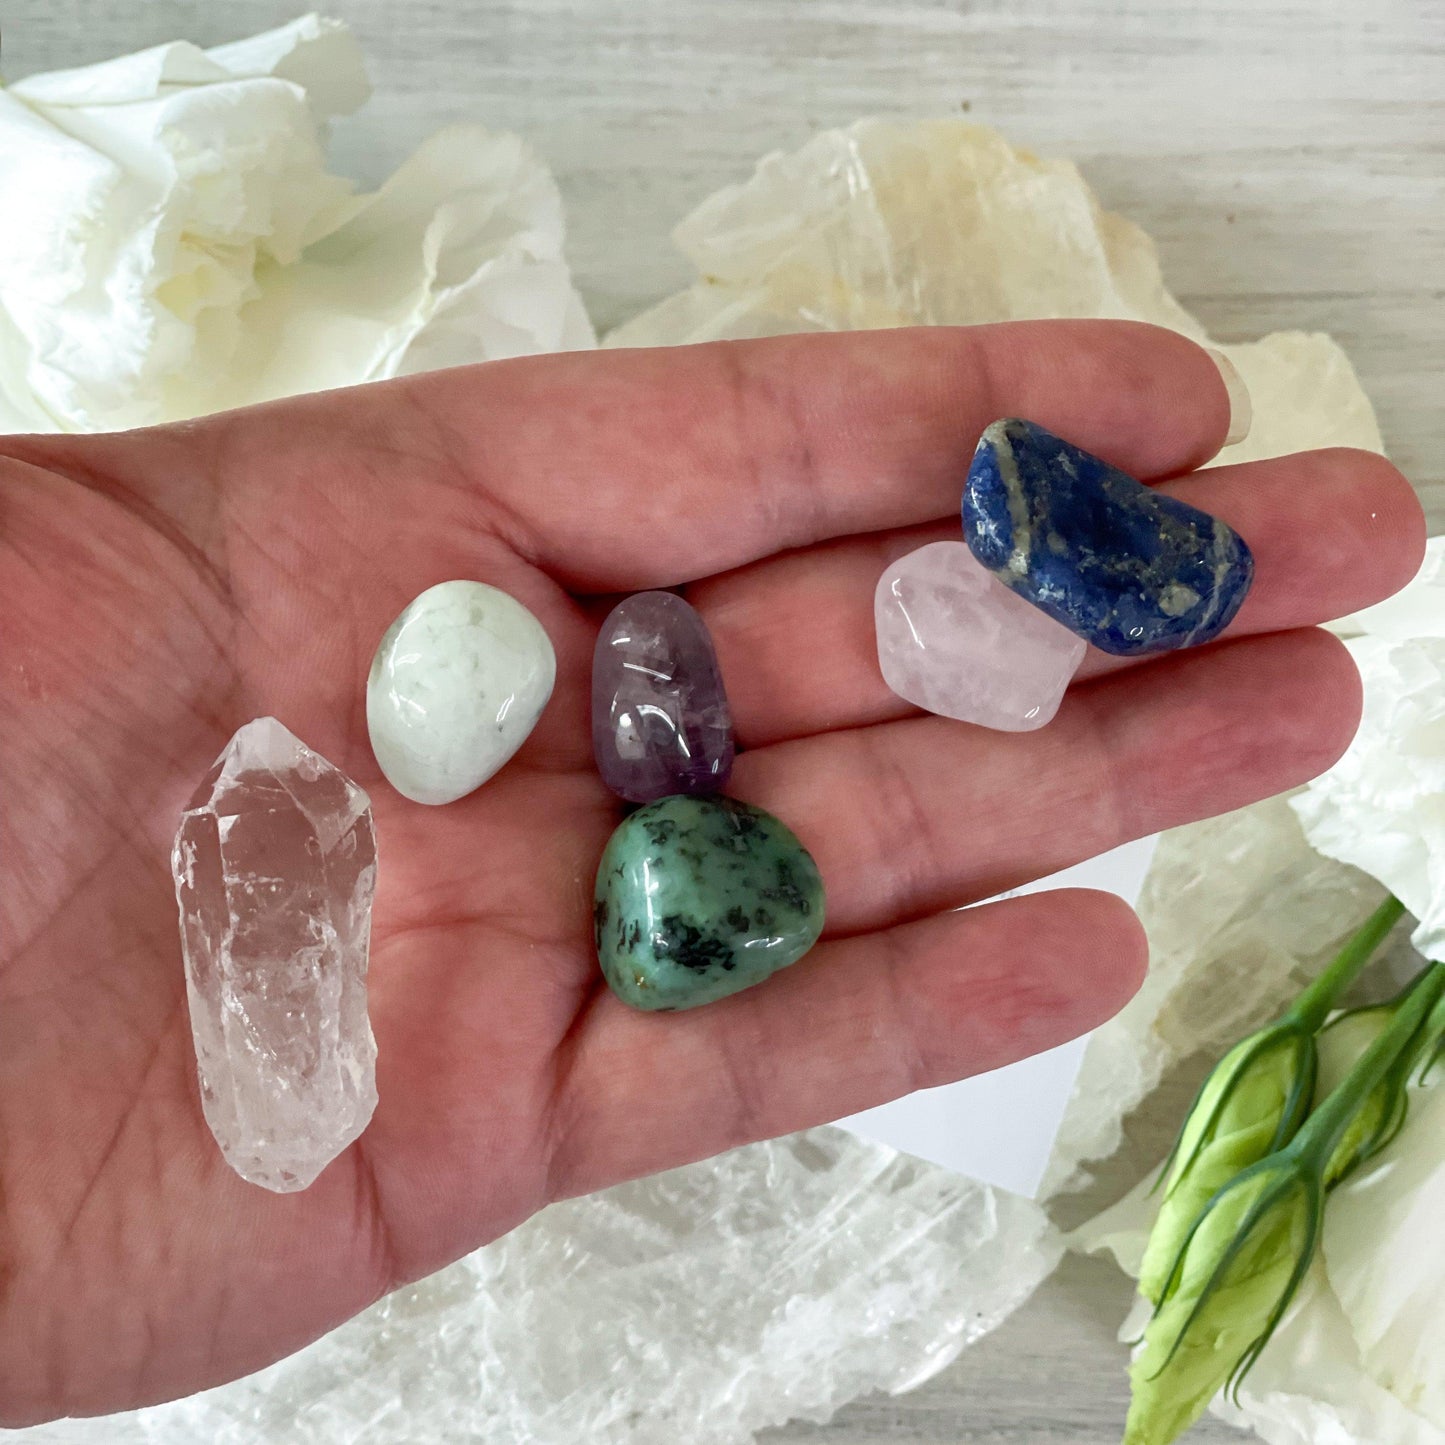 Peace & Tranquility Crystal Kit-Happily Zen